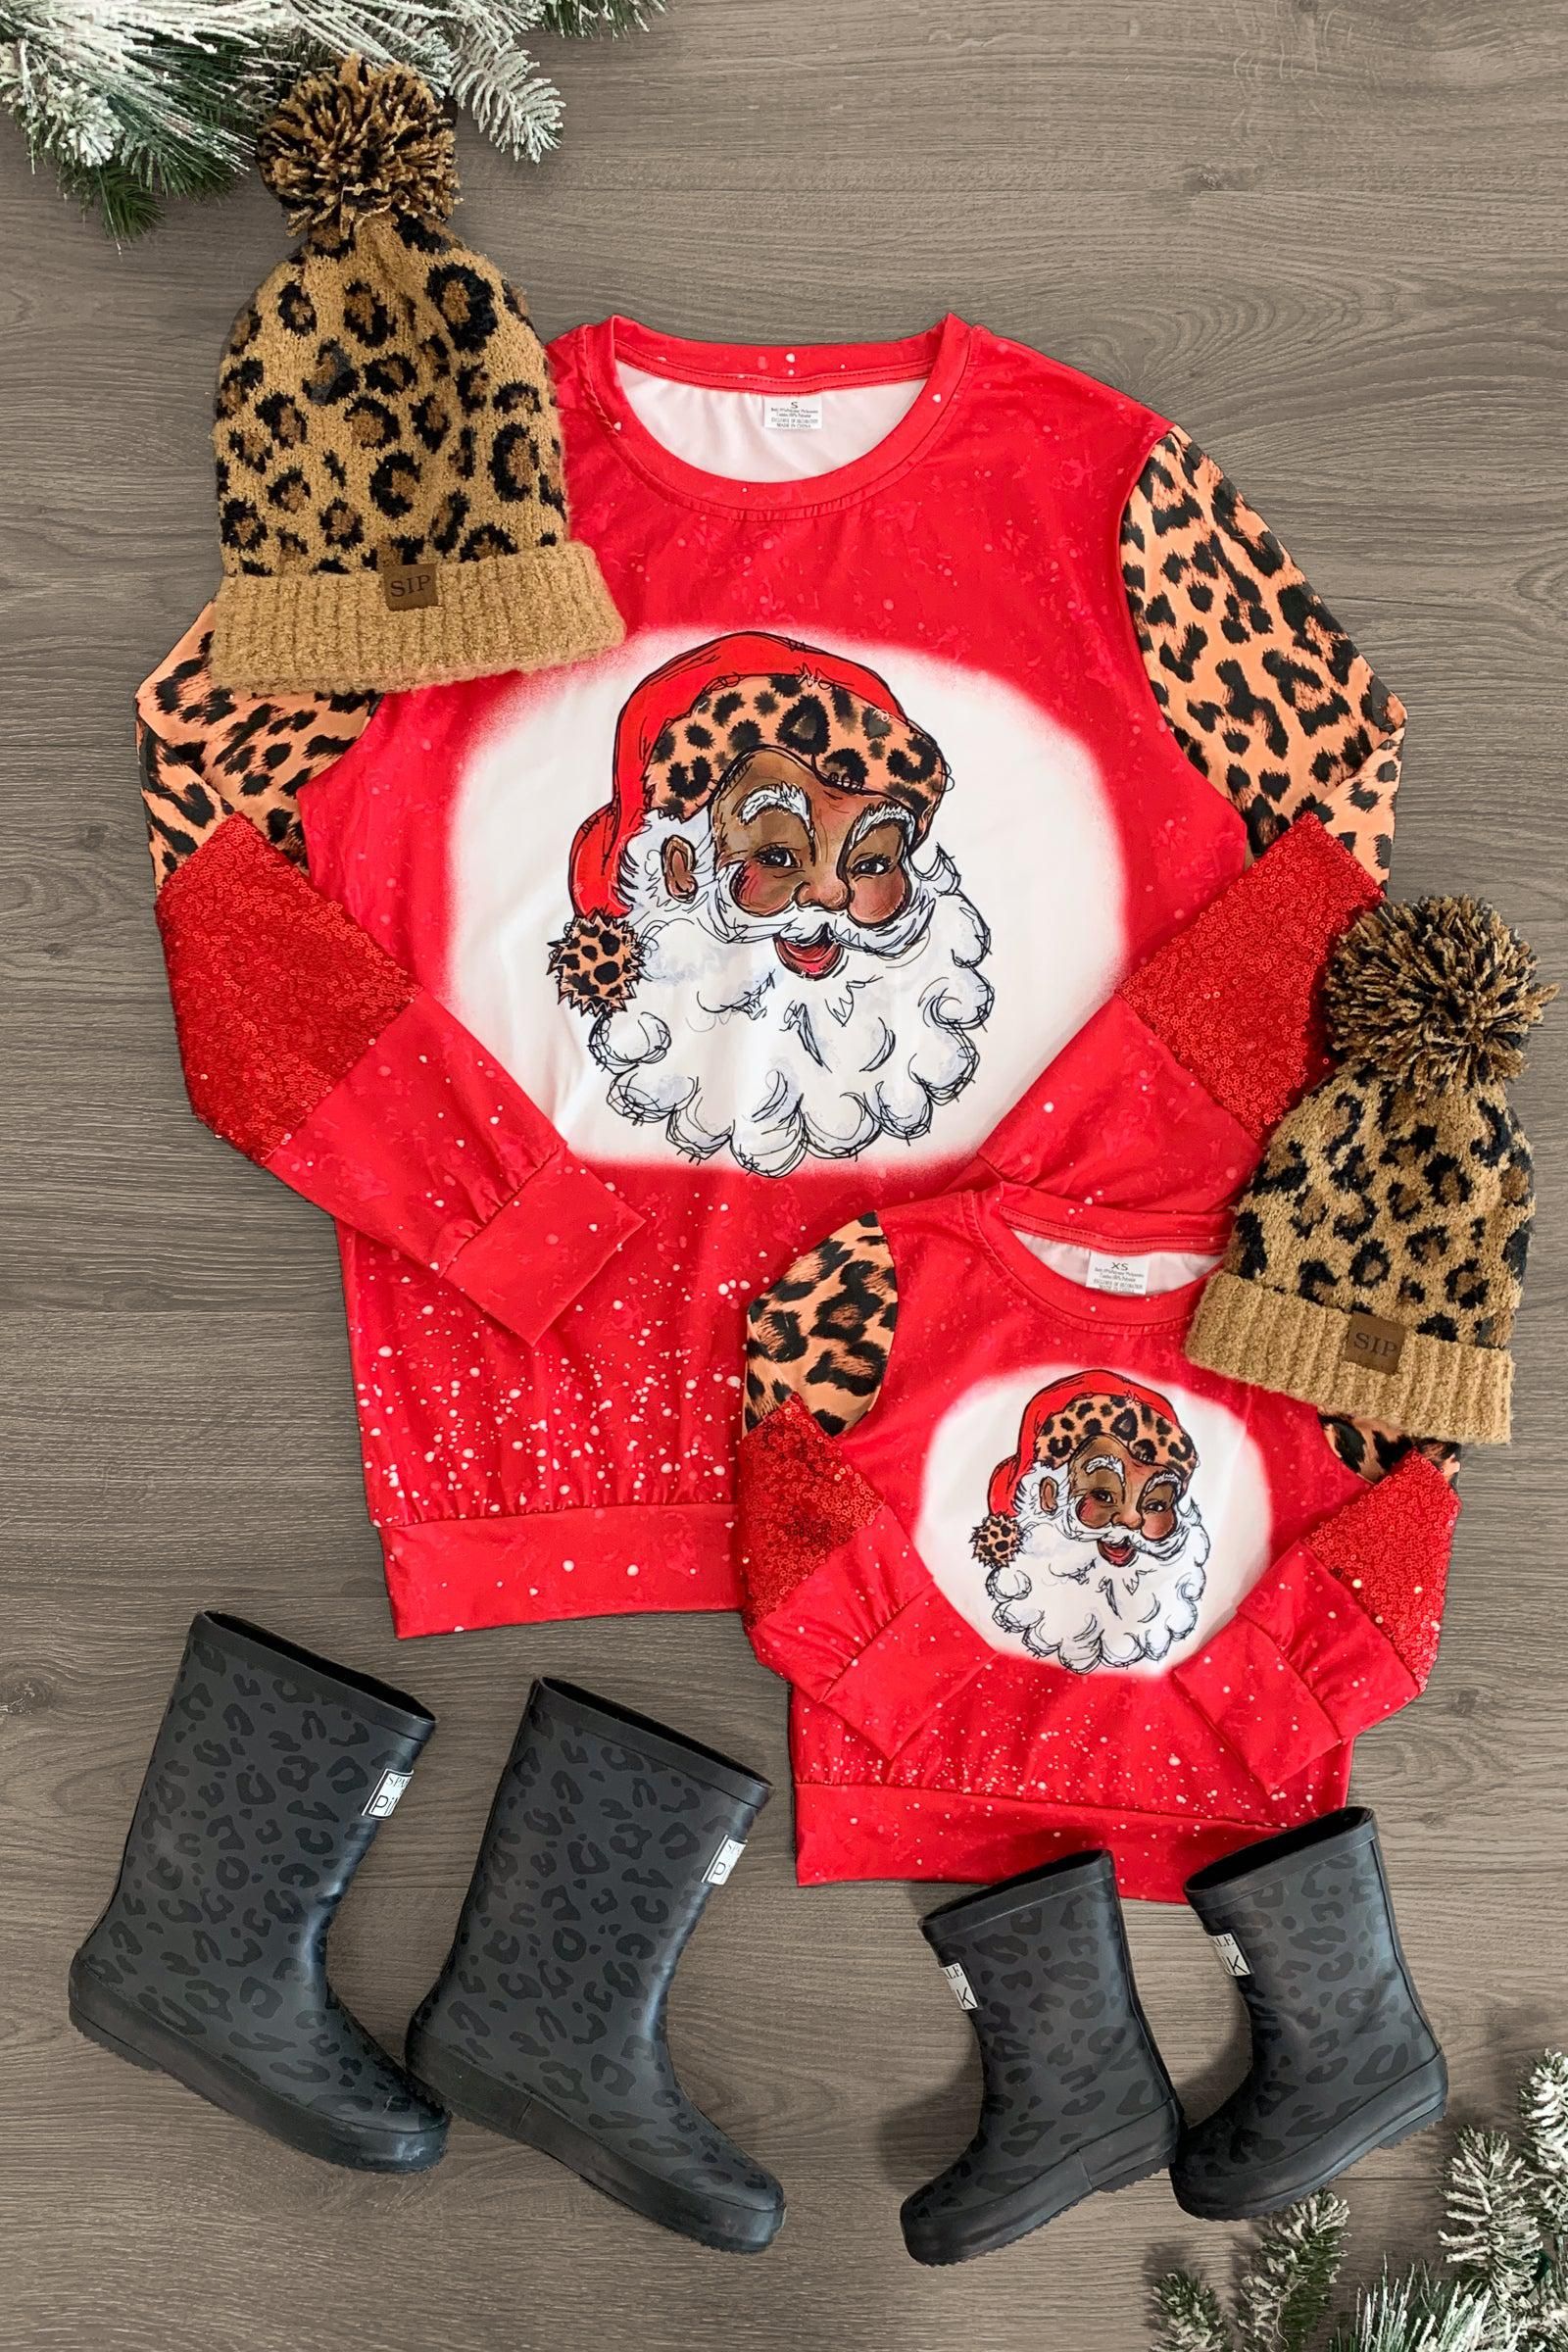 Mom & Me - Sequined Cheetah Santa Top | Sparkle In Pink